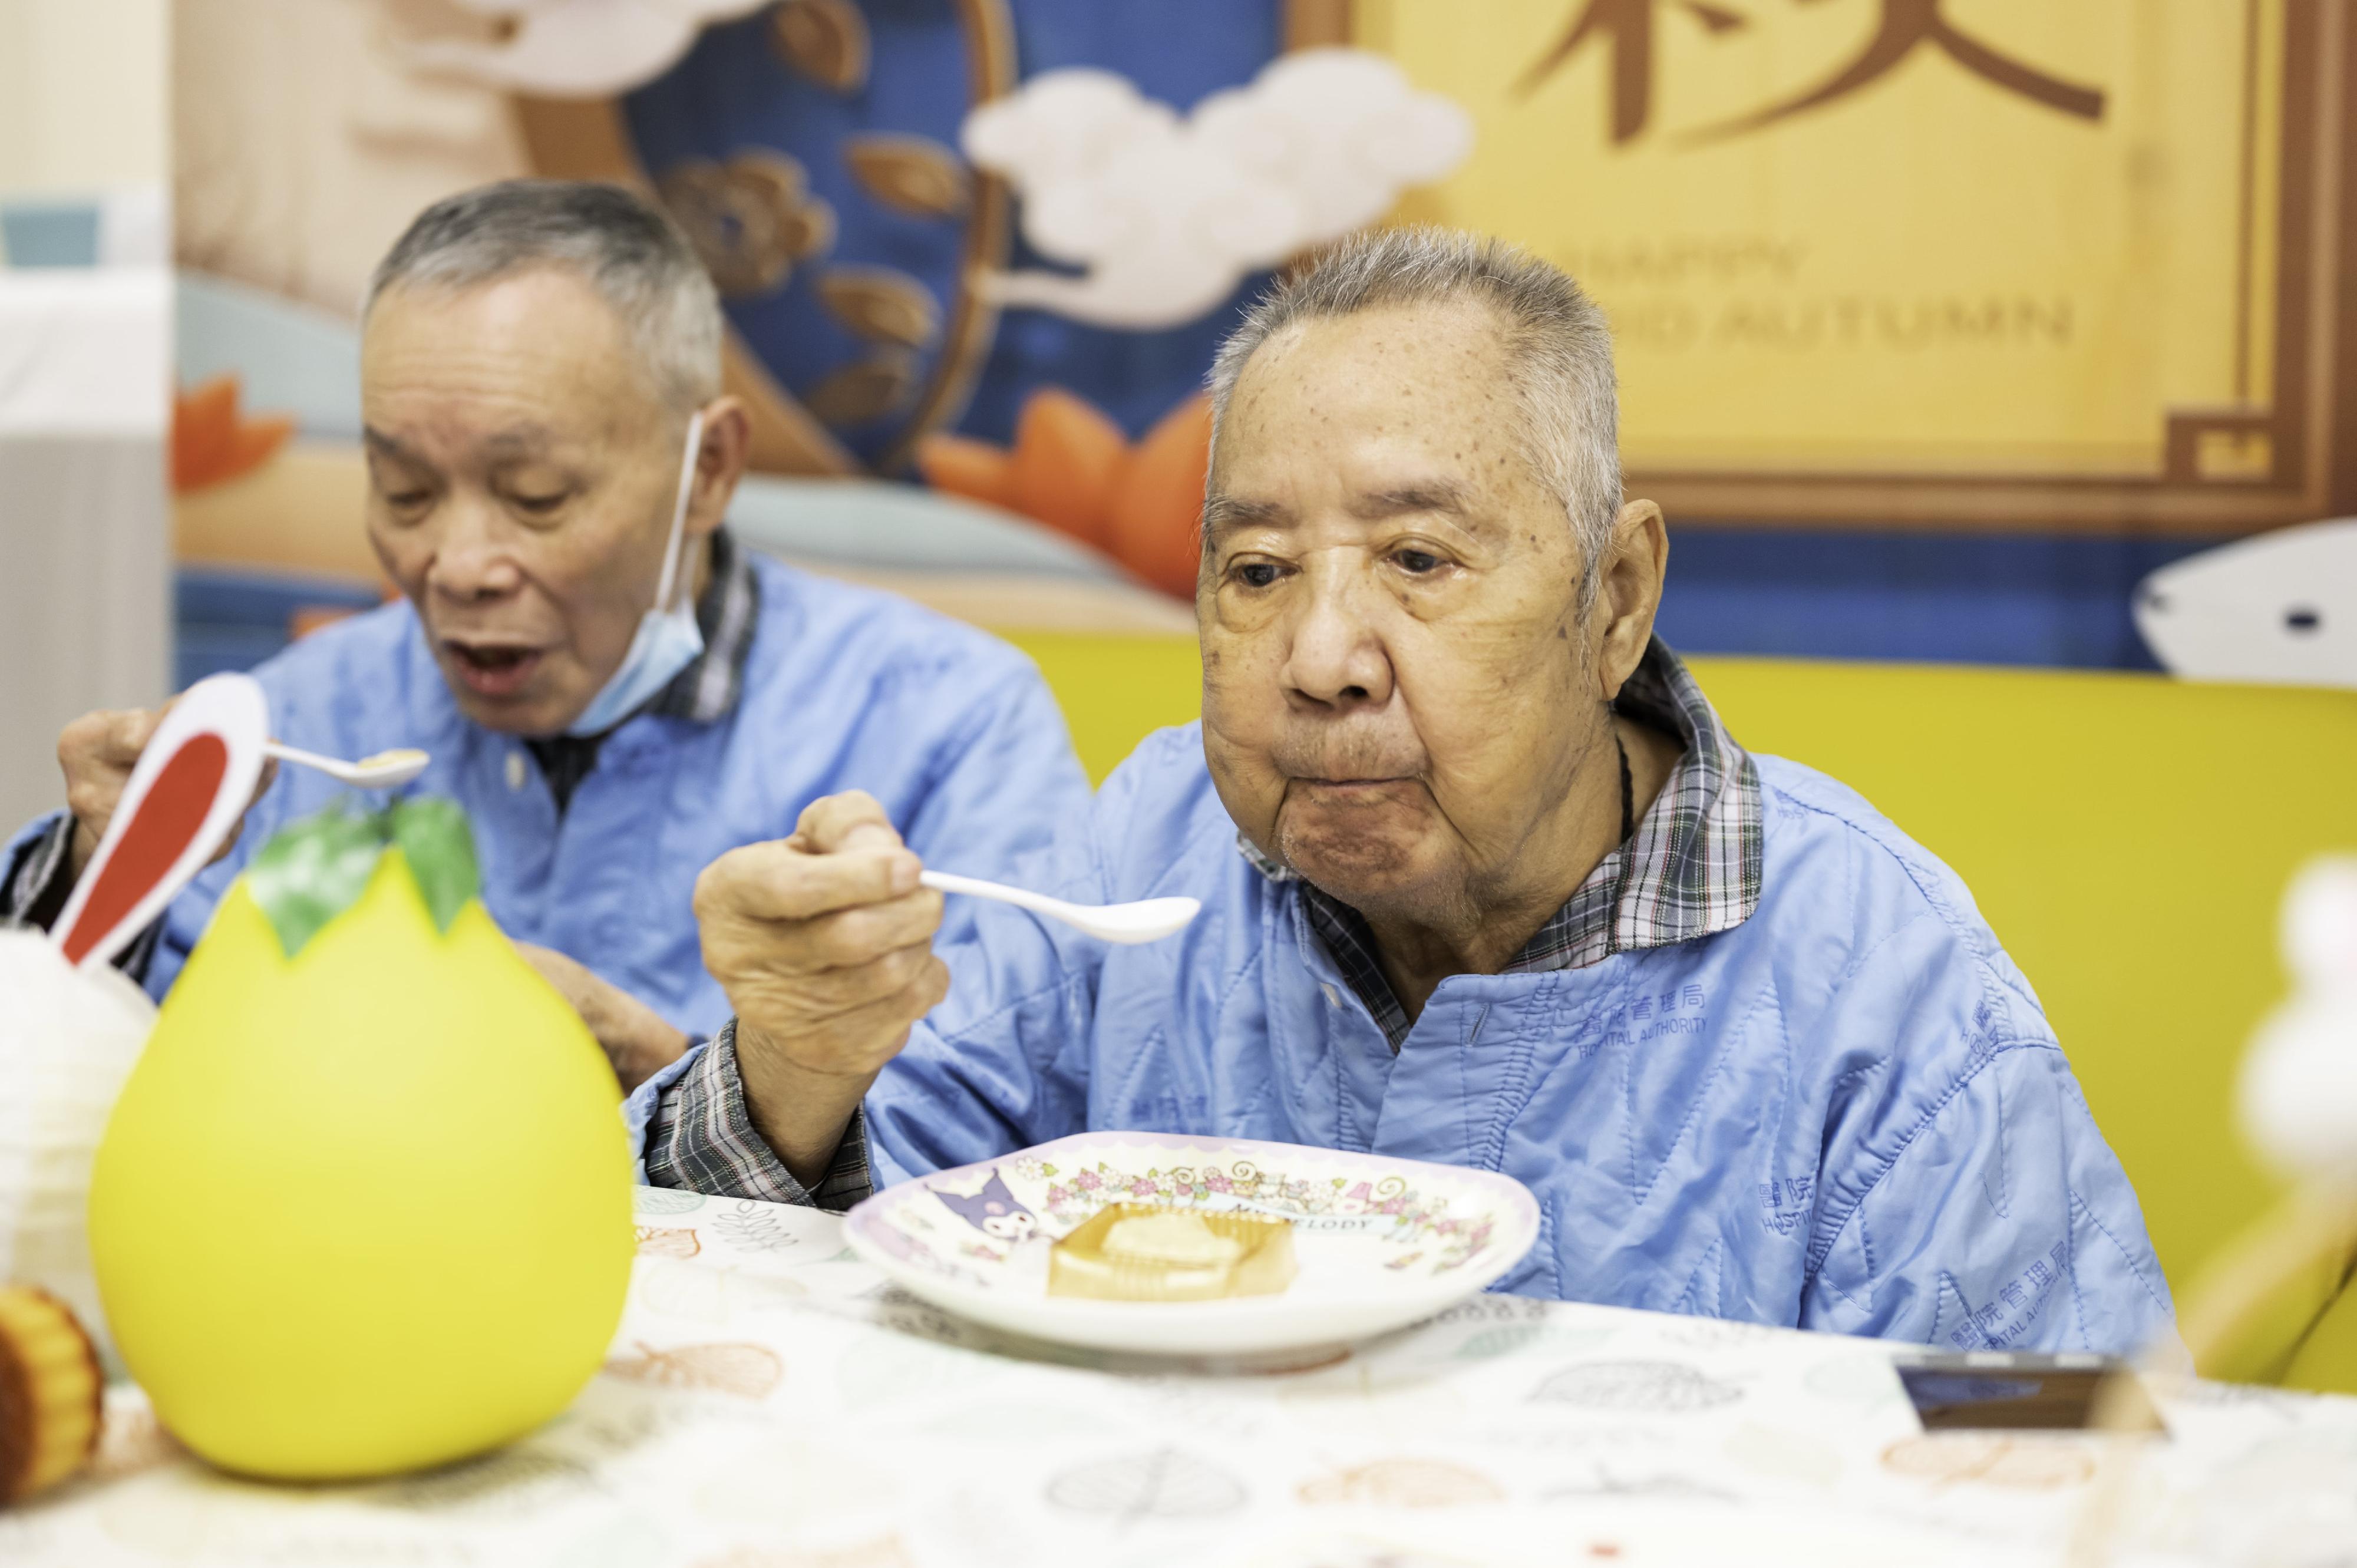 Mid-Autumn Festival celebration activities are arranged by various clusters of the Hospital Authority. "Soft mooncakes" are made from traditional mooncakes, processed with soft meal enzyme gallant and water. The texture of the mooncakes becomes smooth enough for patients with dysphagia to consume with ease.